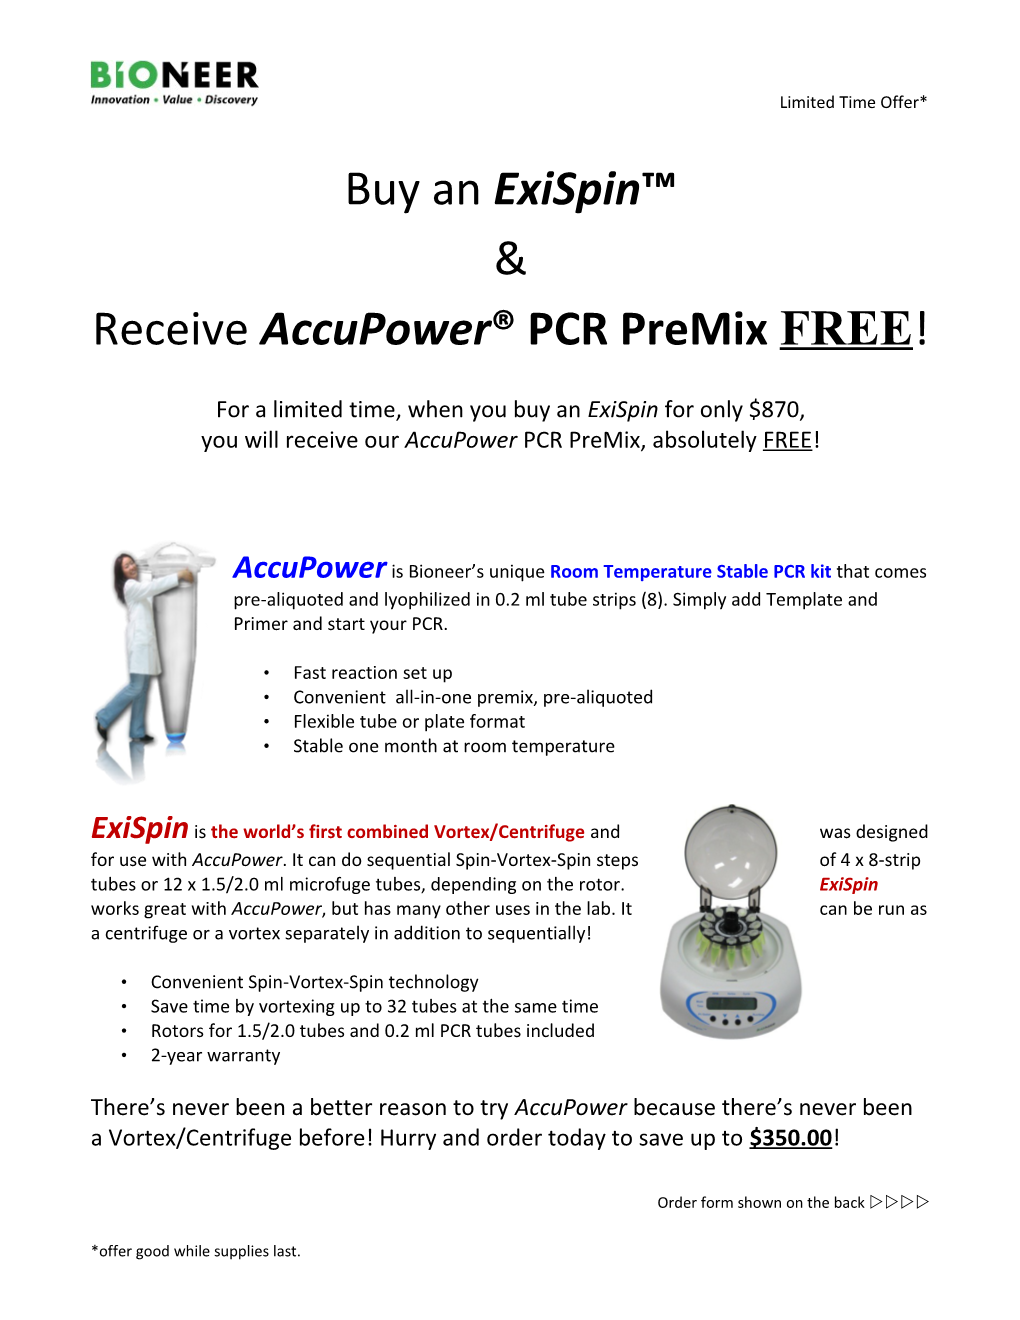 For a Limited Time, When You Buy an Exispin for Only $870